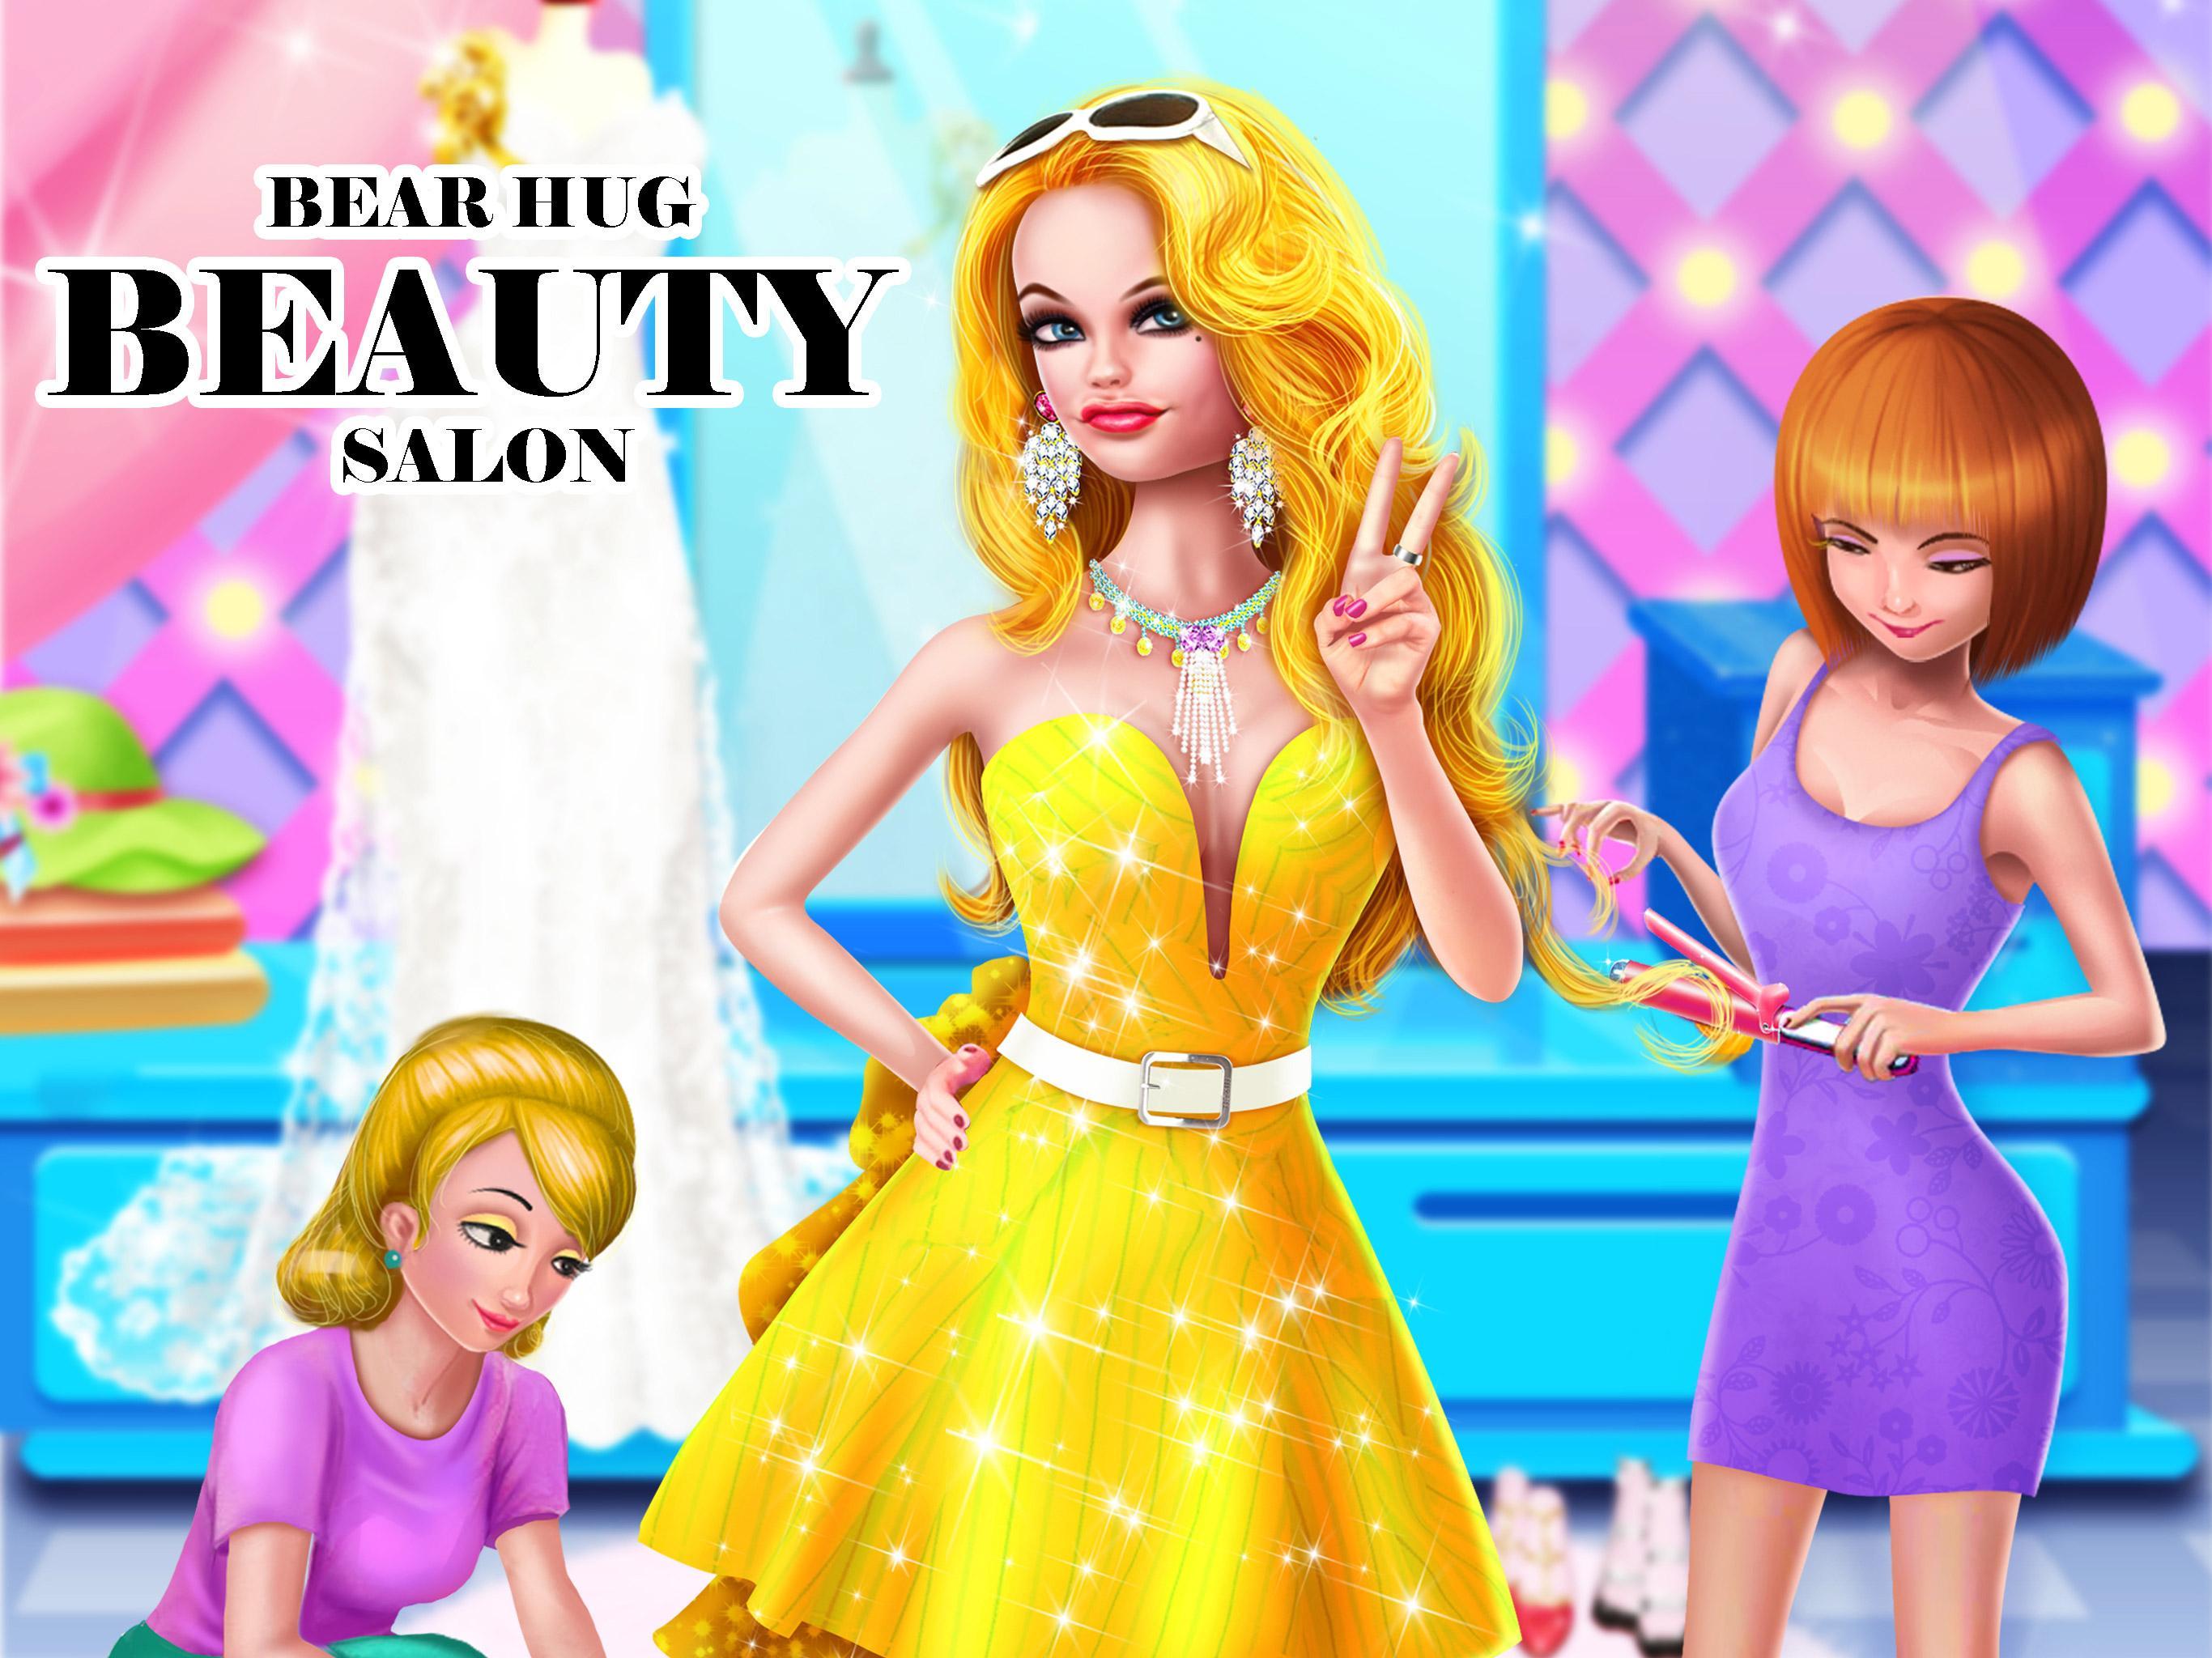 Beauty Salon - Girls Games for Android - APK Download